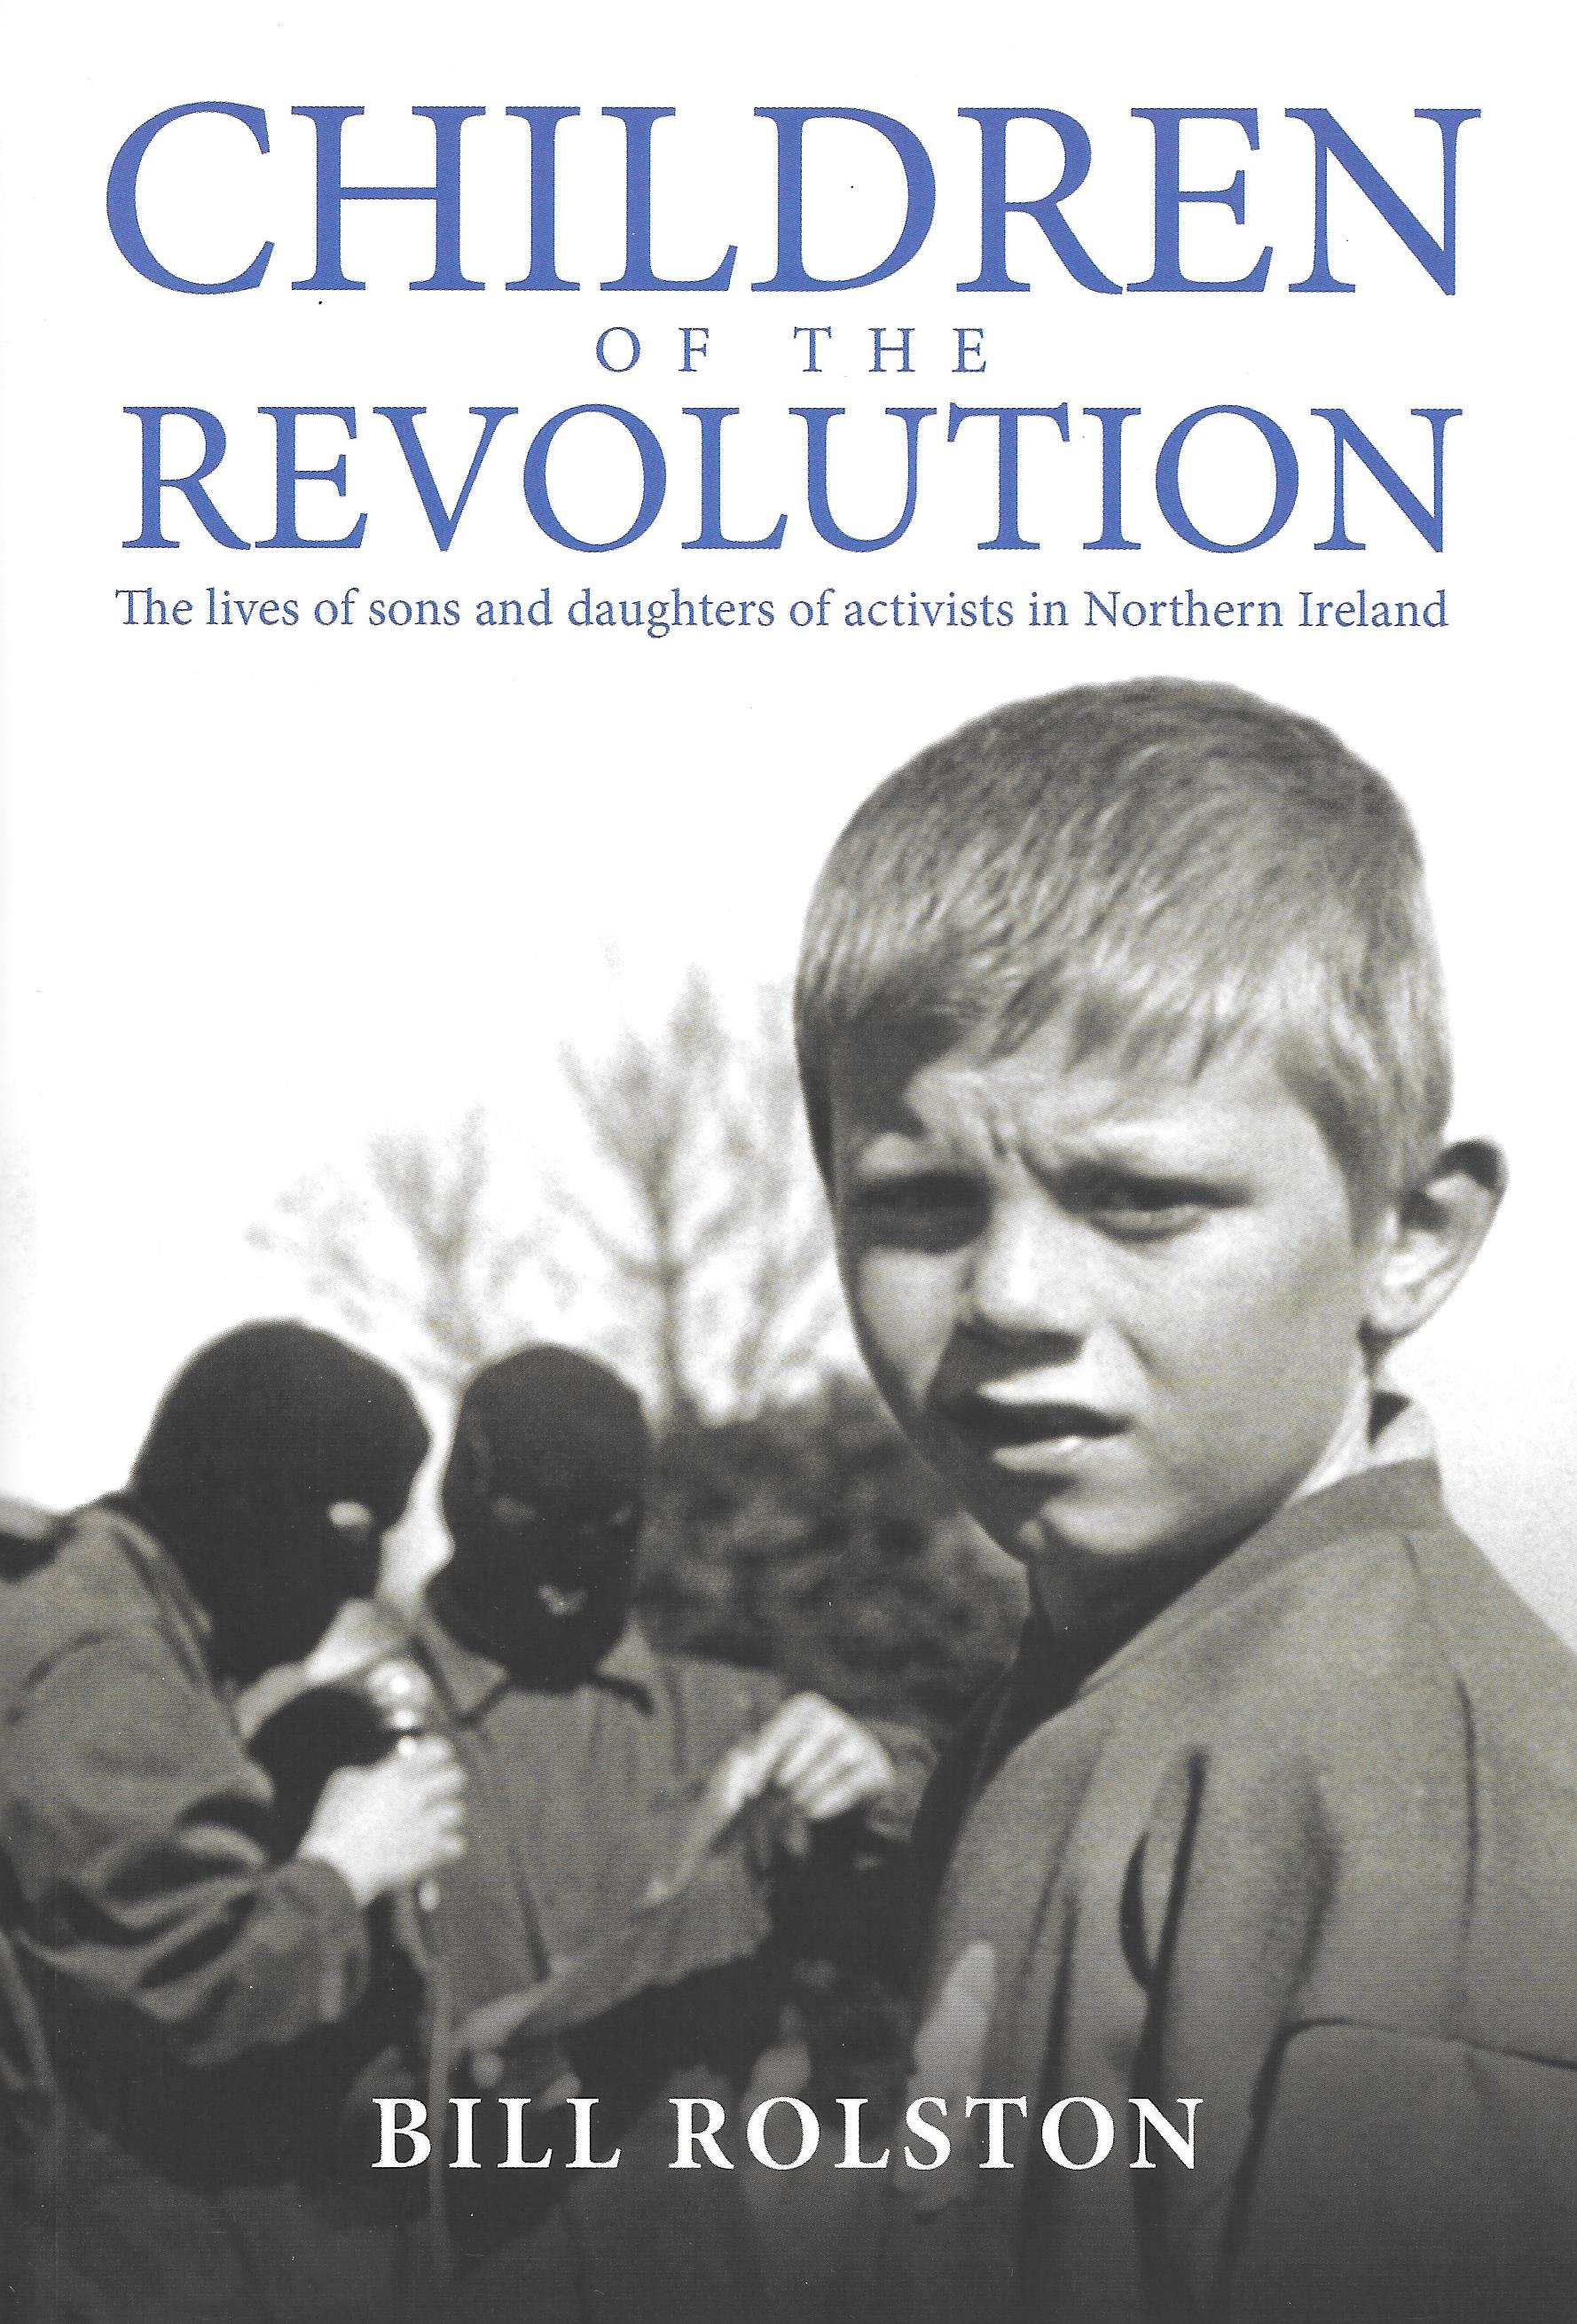 Children of the Revolution: The Lives of Sons and Daughters of Activists in Northern Ireland